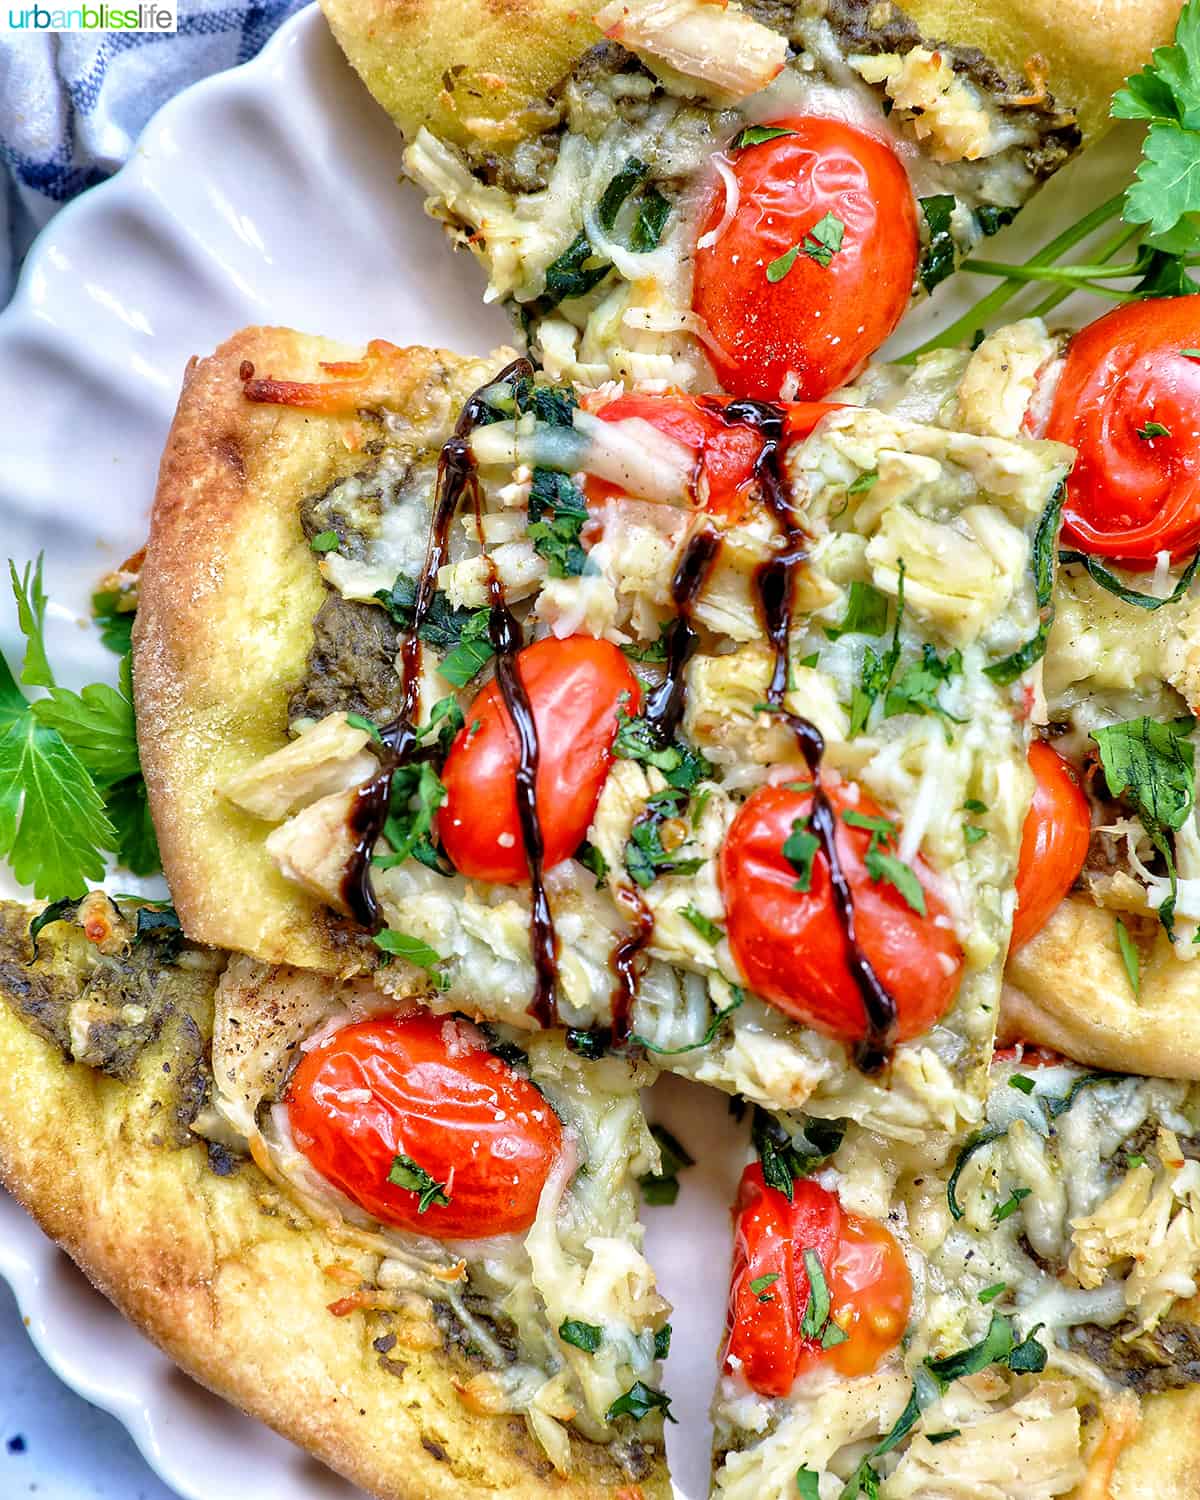 slices of chicken pesto flatbread on a plate, with balsamic drizzle.